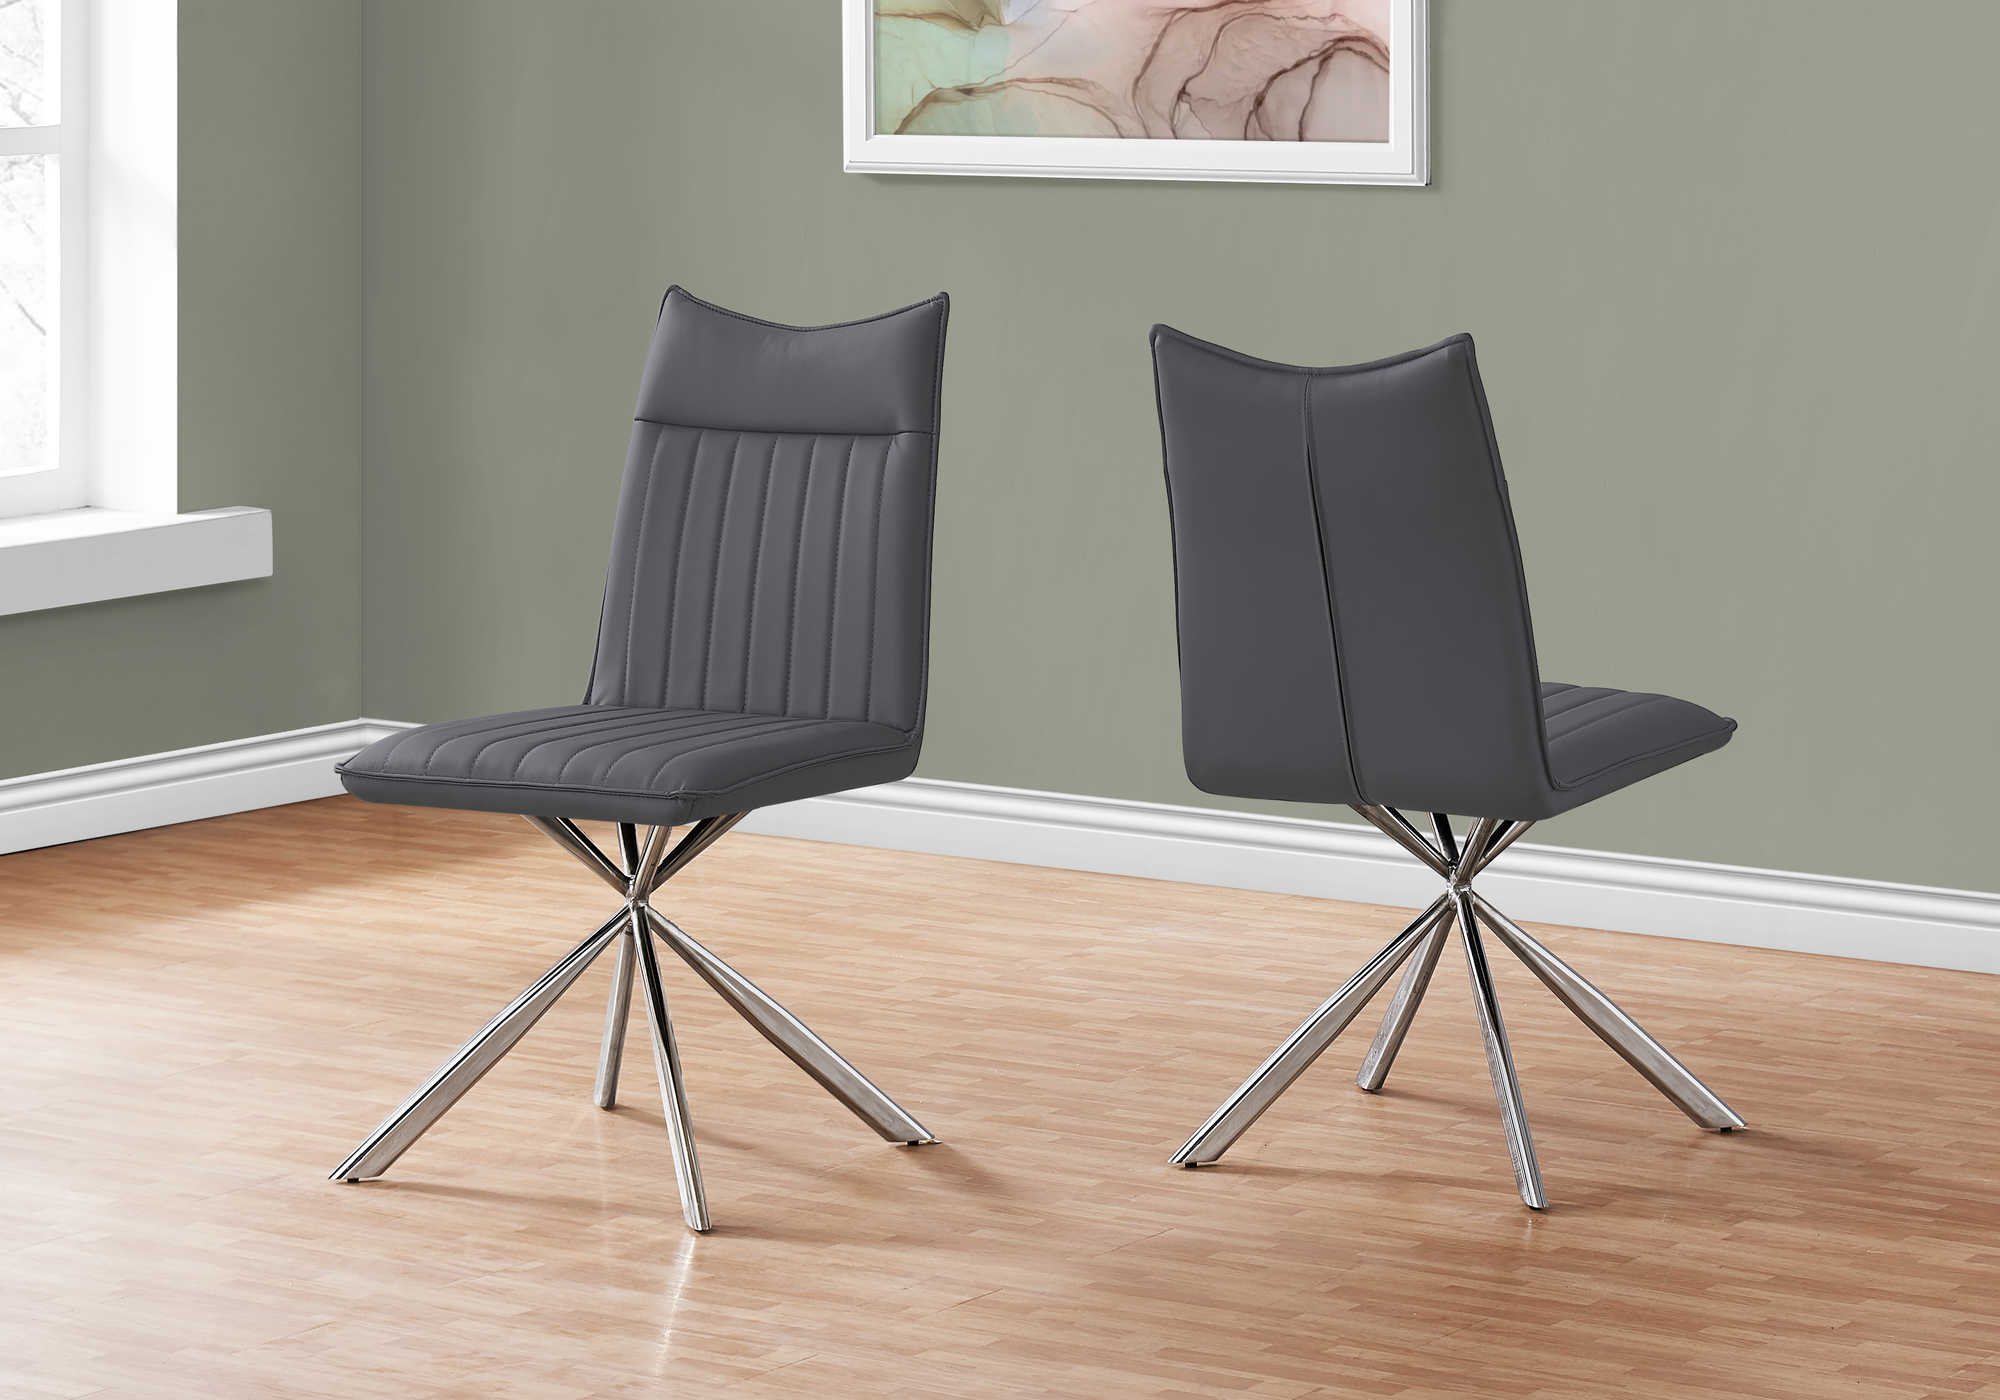 DINING CHAIR - 2PCS / 36"H / GREY LEATHER-LOOK / CHROME